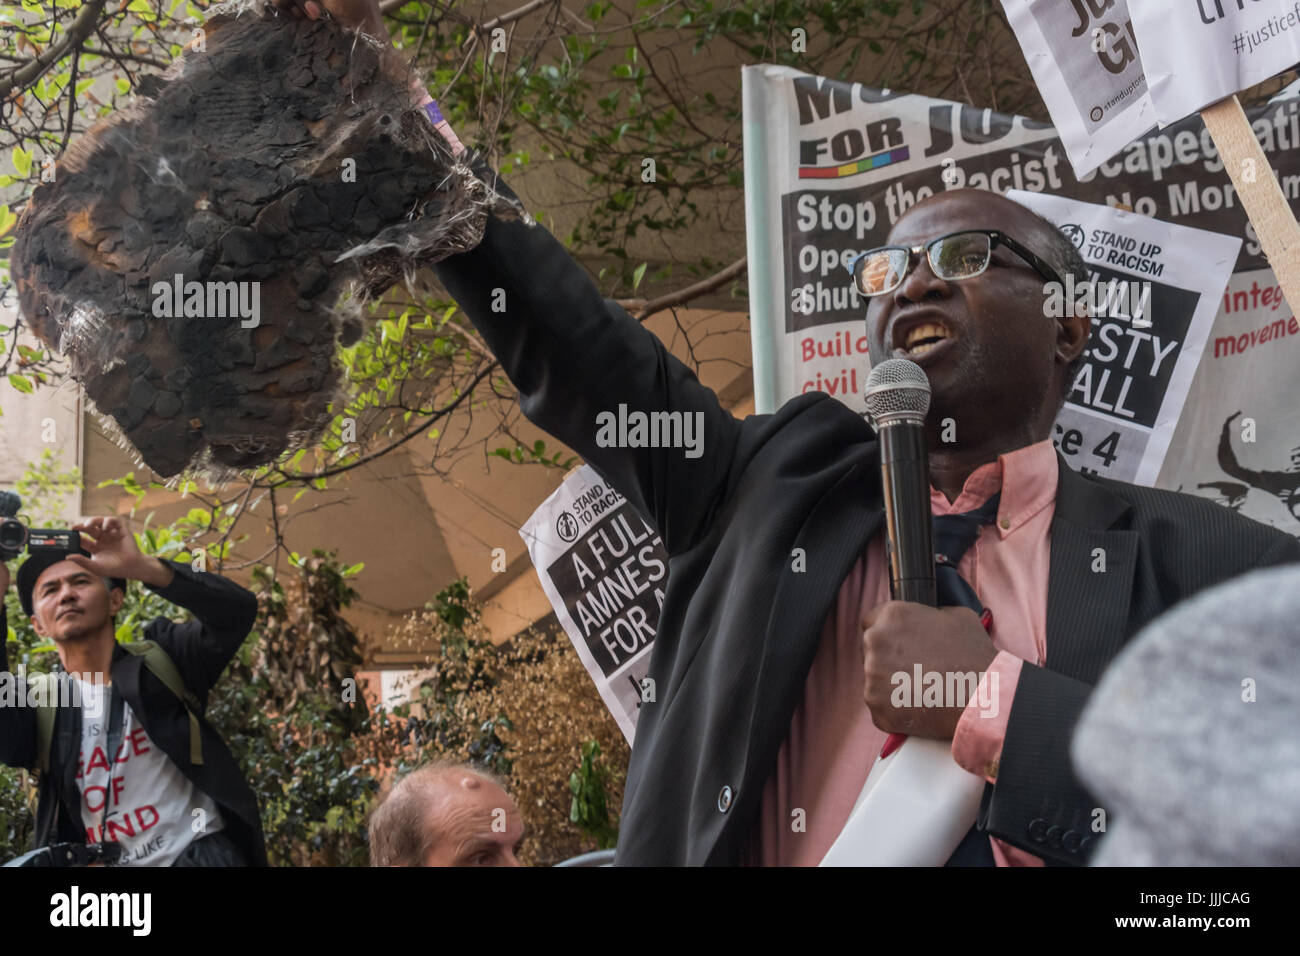 July 19, 2017 - London, UK - London, UK. 19th July 2017. A man who lost family members speaks with passion holding a square of the cladding from Grenfell Tower at the protest by survivors and supporters at the council meeting at Kensington Town Hall telling councillors to resign. A couple of hundred protesters attended the council meeting, though some survivors were kept outside until the residents representative refused to speak until they were allowed in and there were many empty seats, while hundreds more watched the proceedings on a giant screen outside, erupting with fury at the complacen Stock Photo